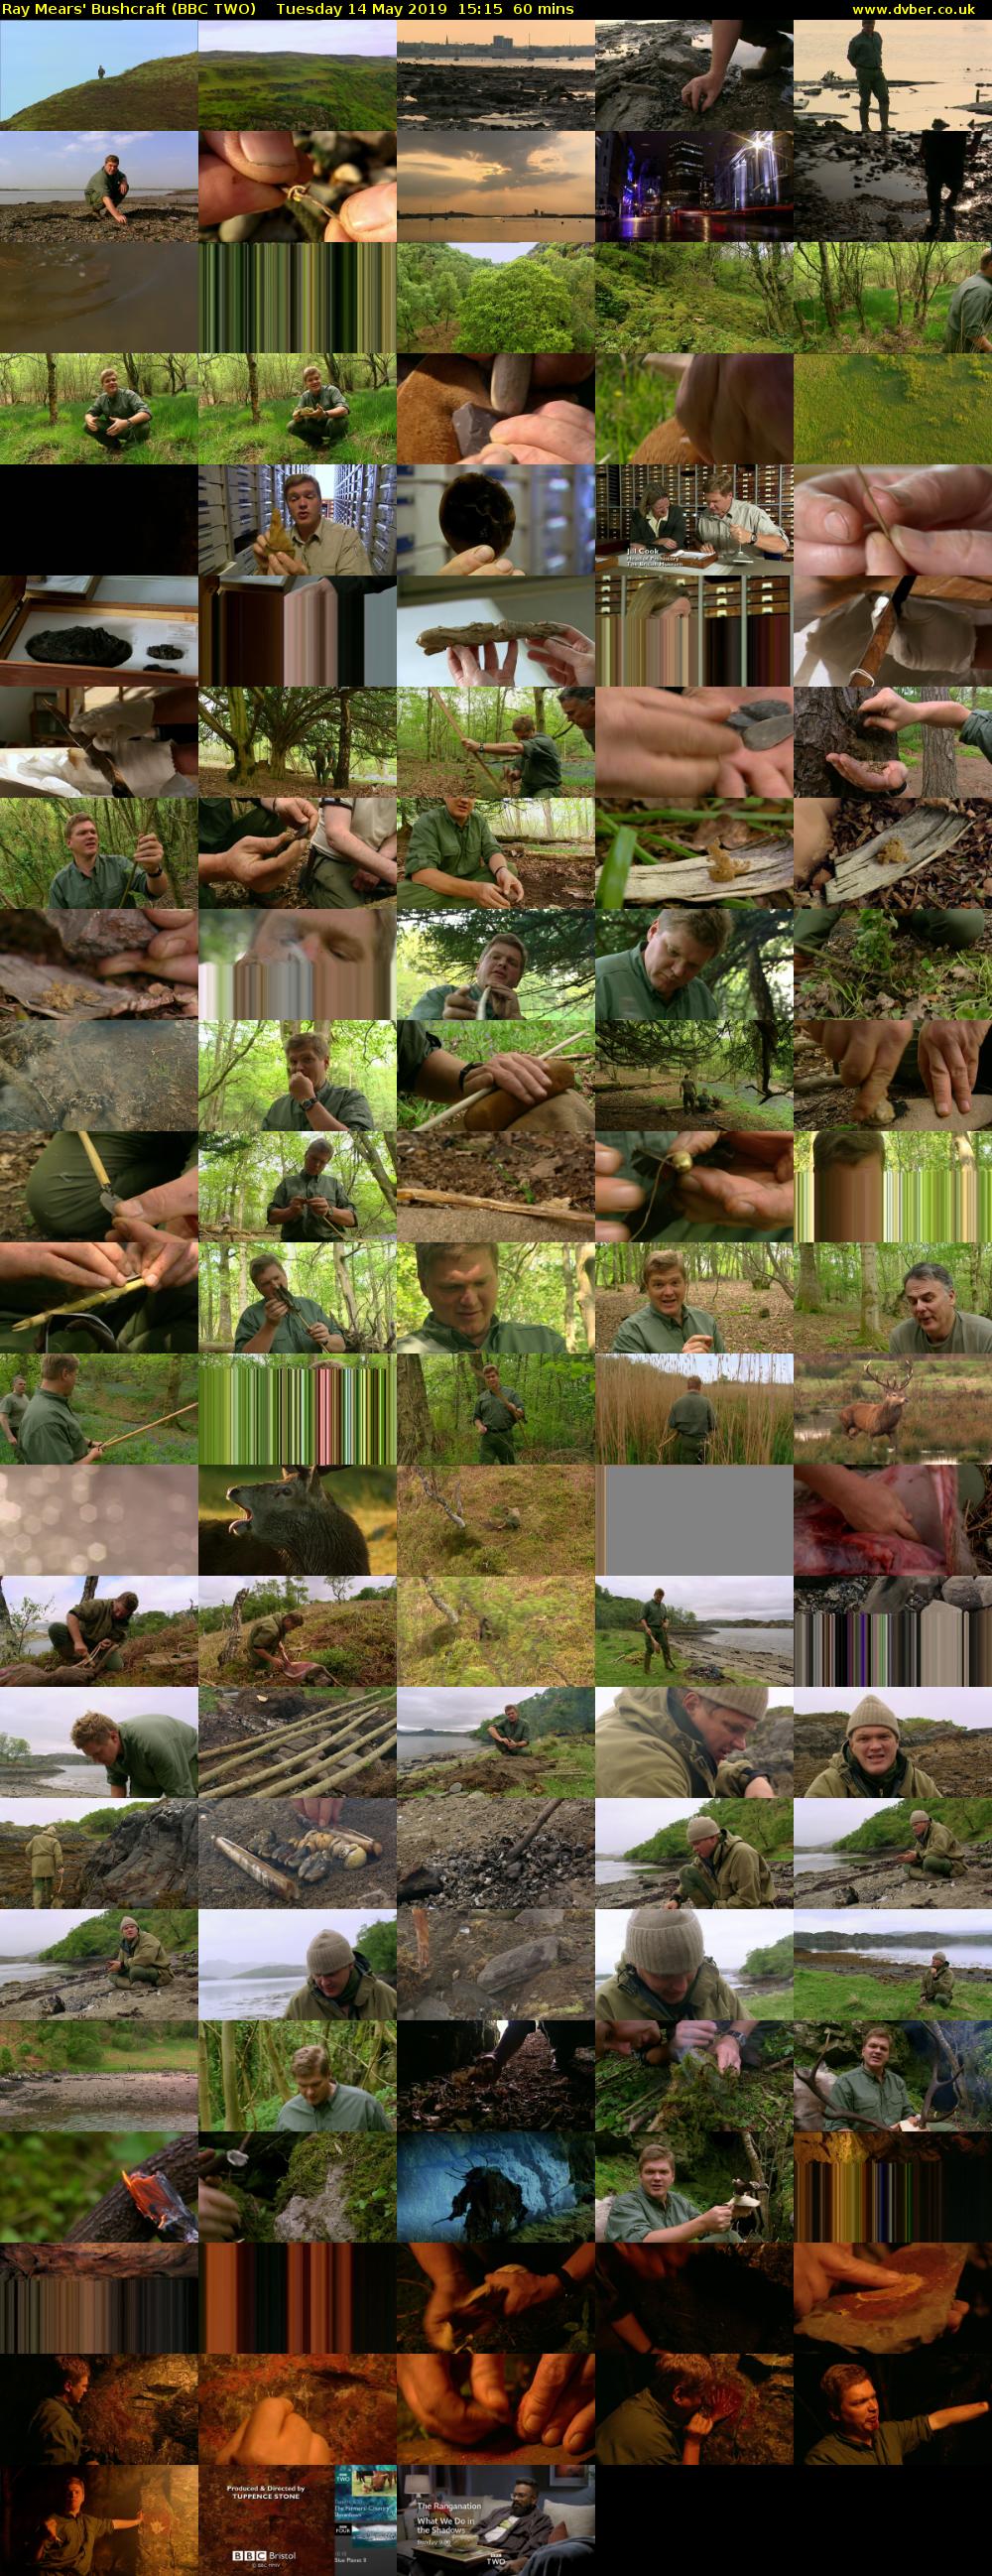 Ray Mears' Bushcraft (BBC TWO) Tuesday 14 May 2019 15:15 - 16:15